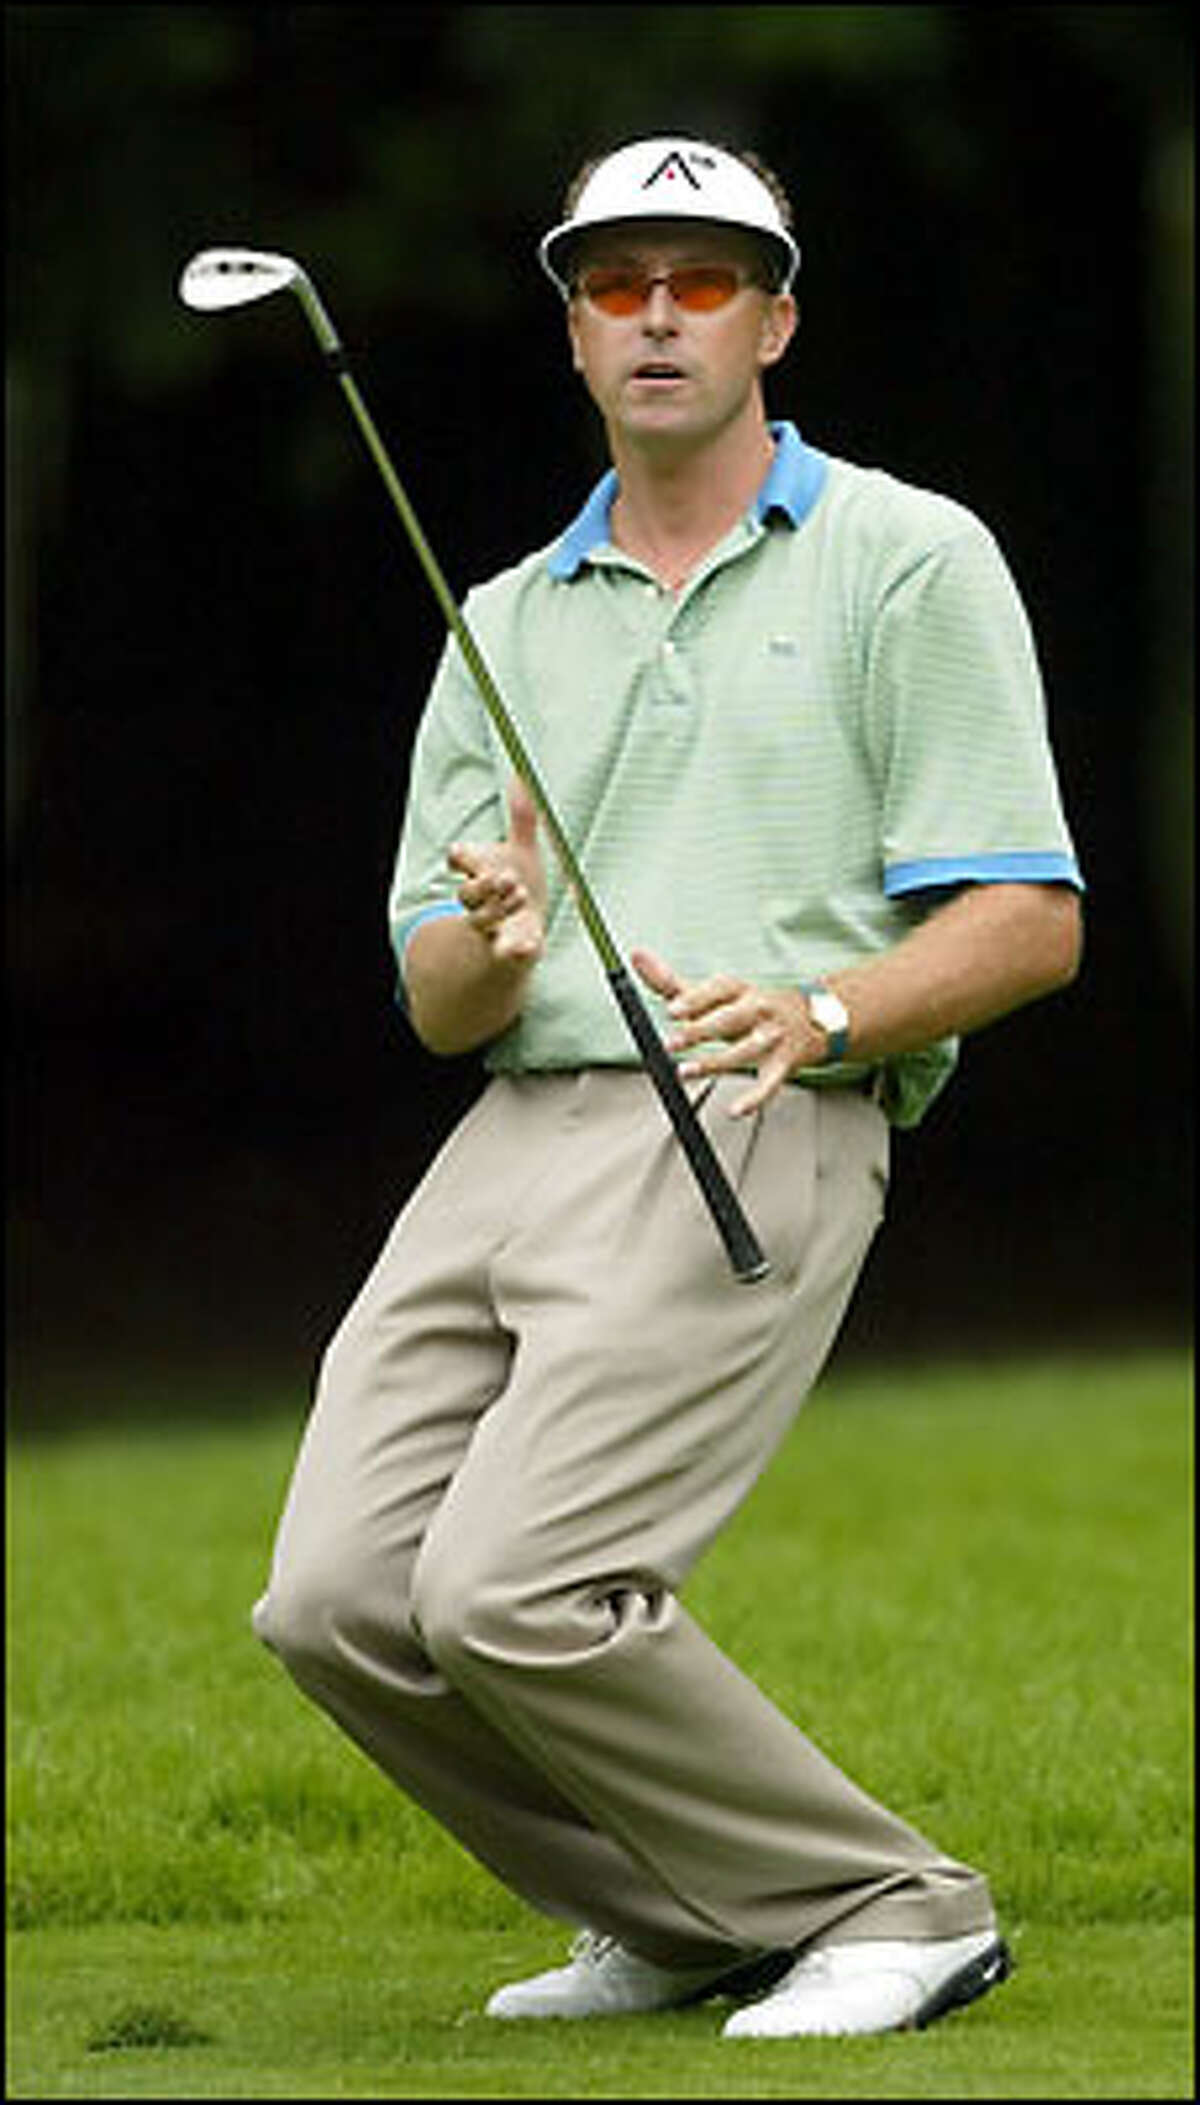 Robert Allenby from Austrralia reacts to a poor second shot on No. 11.